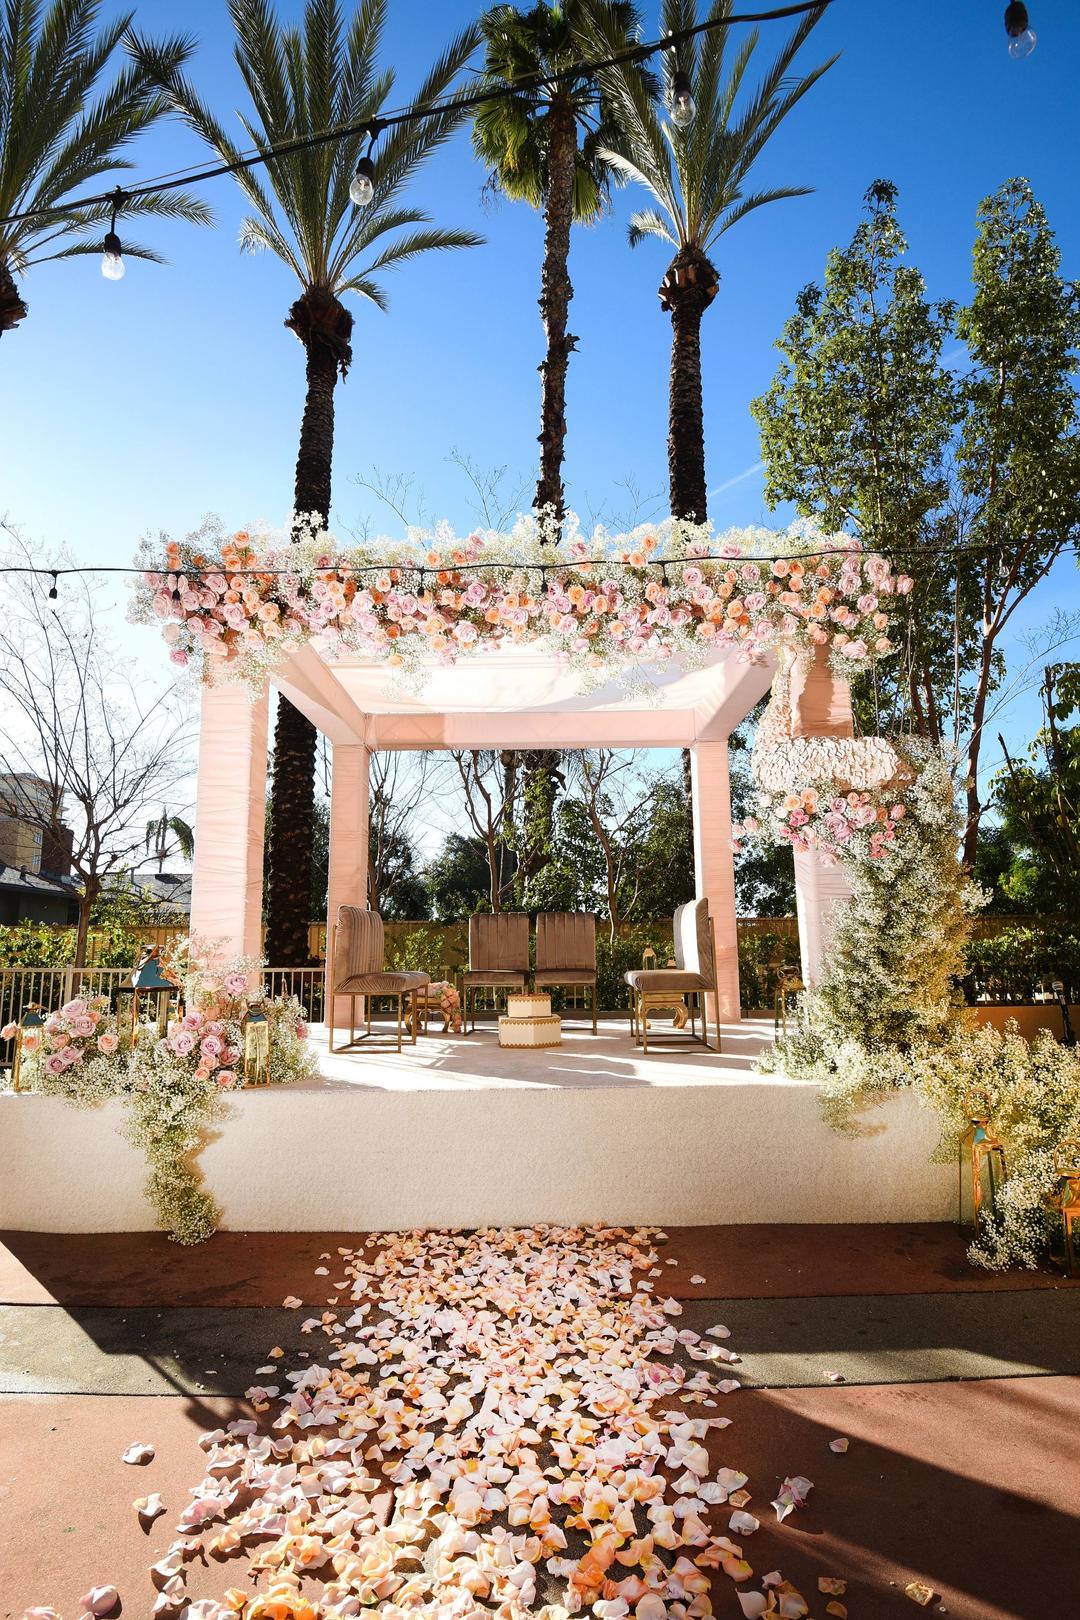 Your event will be as unique as you are on our beautiful wedding patio.